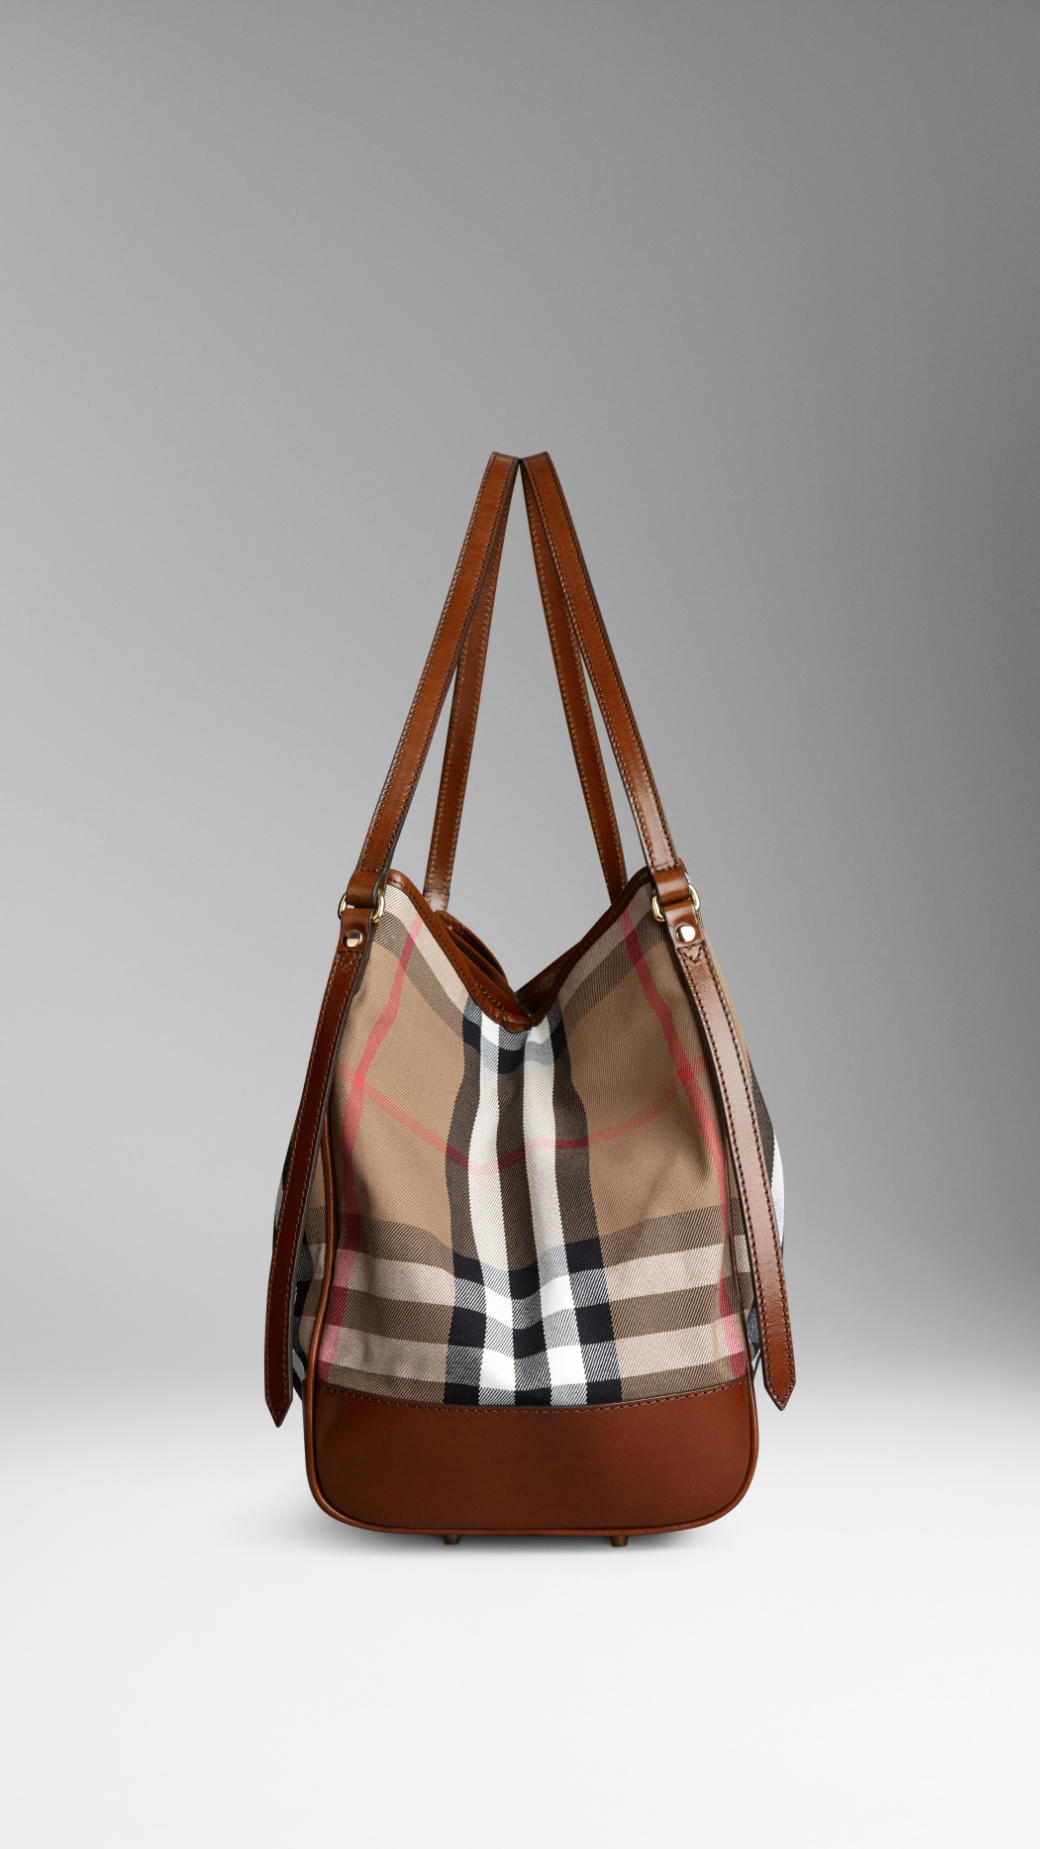 Lyst - Burberry Medium House Check Tote Bag in Brown